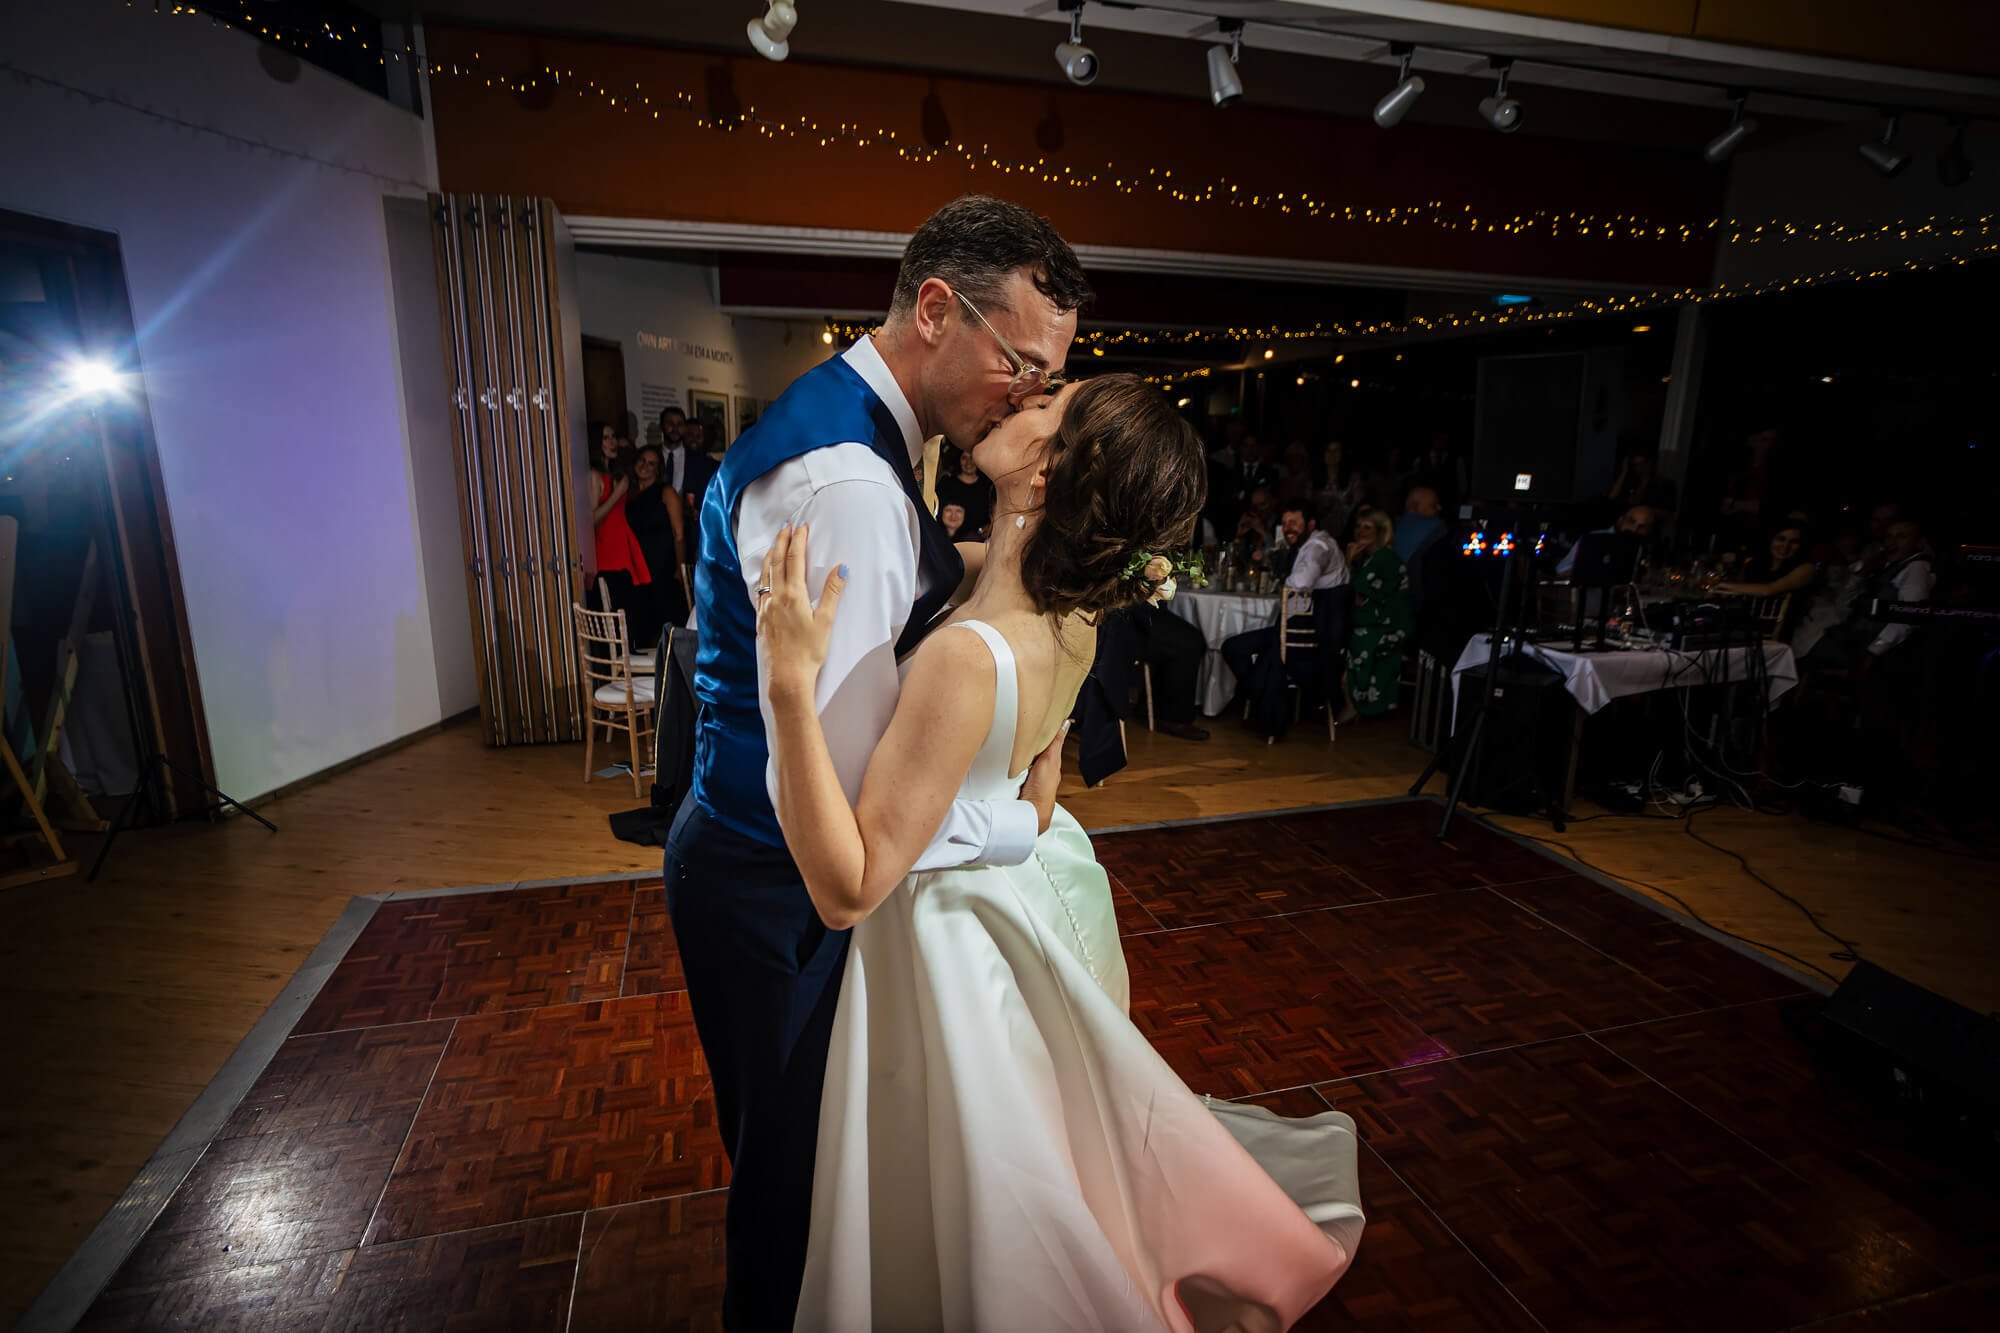 A kiss on the dance floor at a Yorkshire wedding